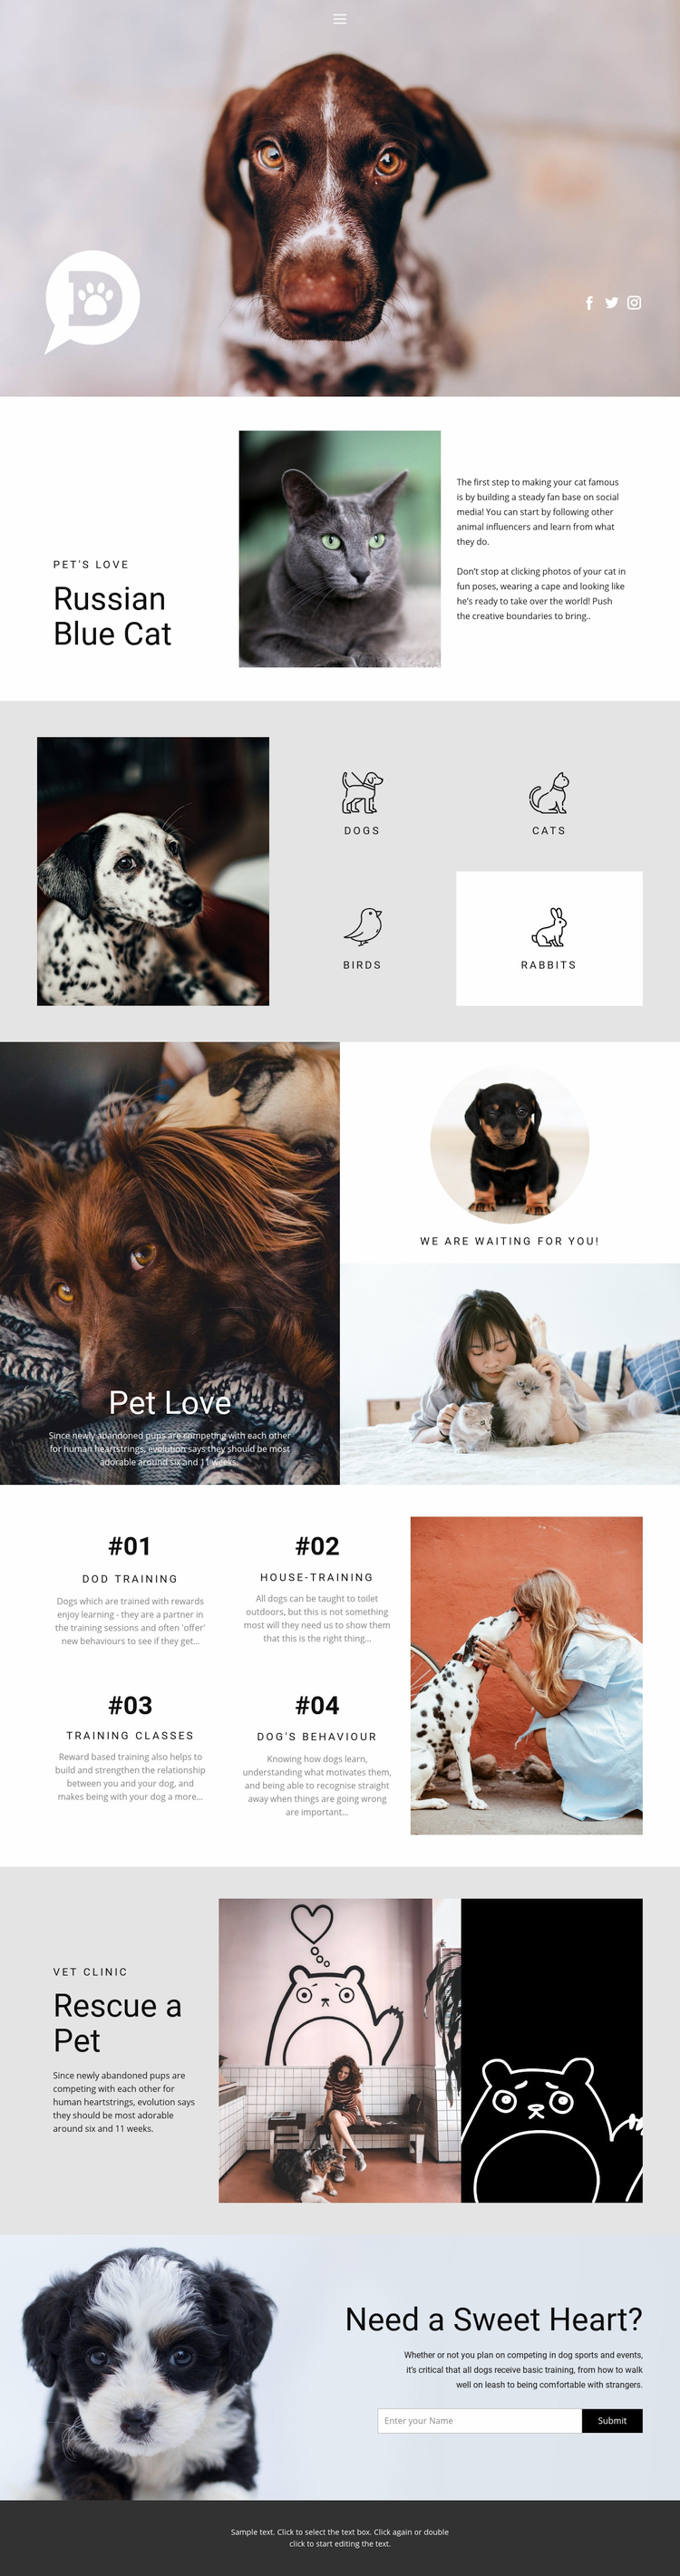 Care for pets and animals Squarespace Template Alternative